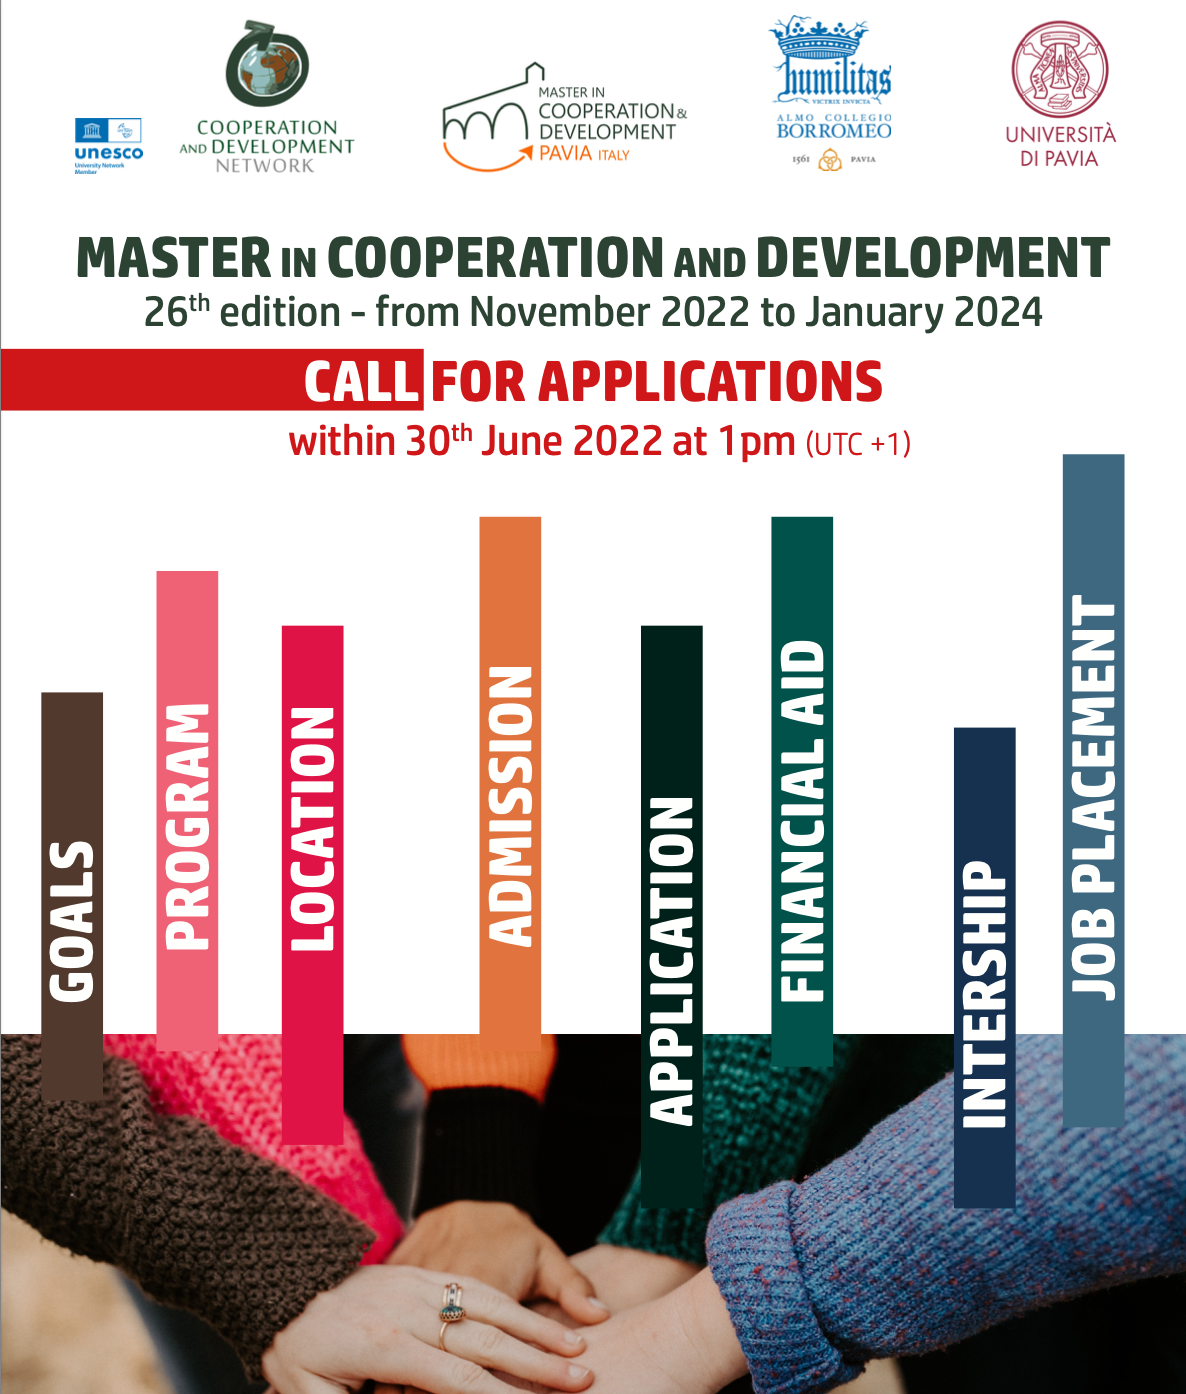 Scholarship for the Masters Program in Cooperation and Development (C&D) at  the The University of Pavia,Italy.